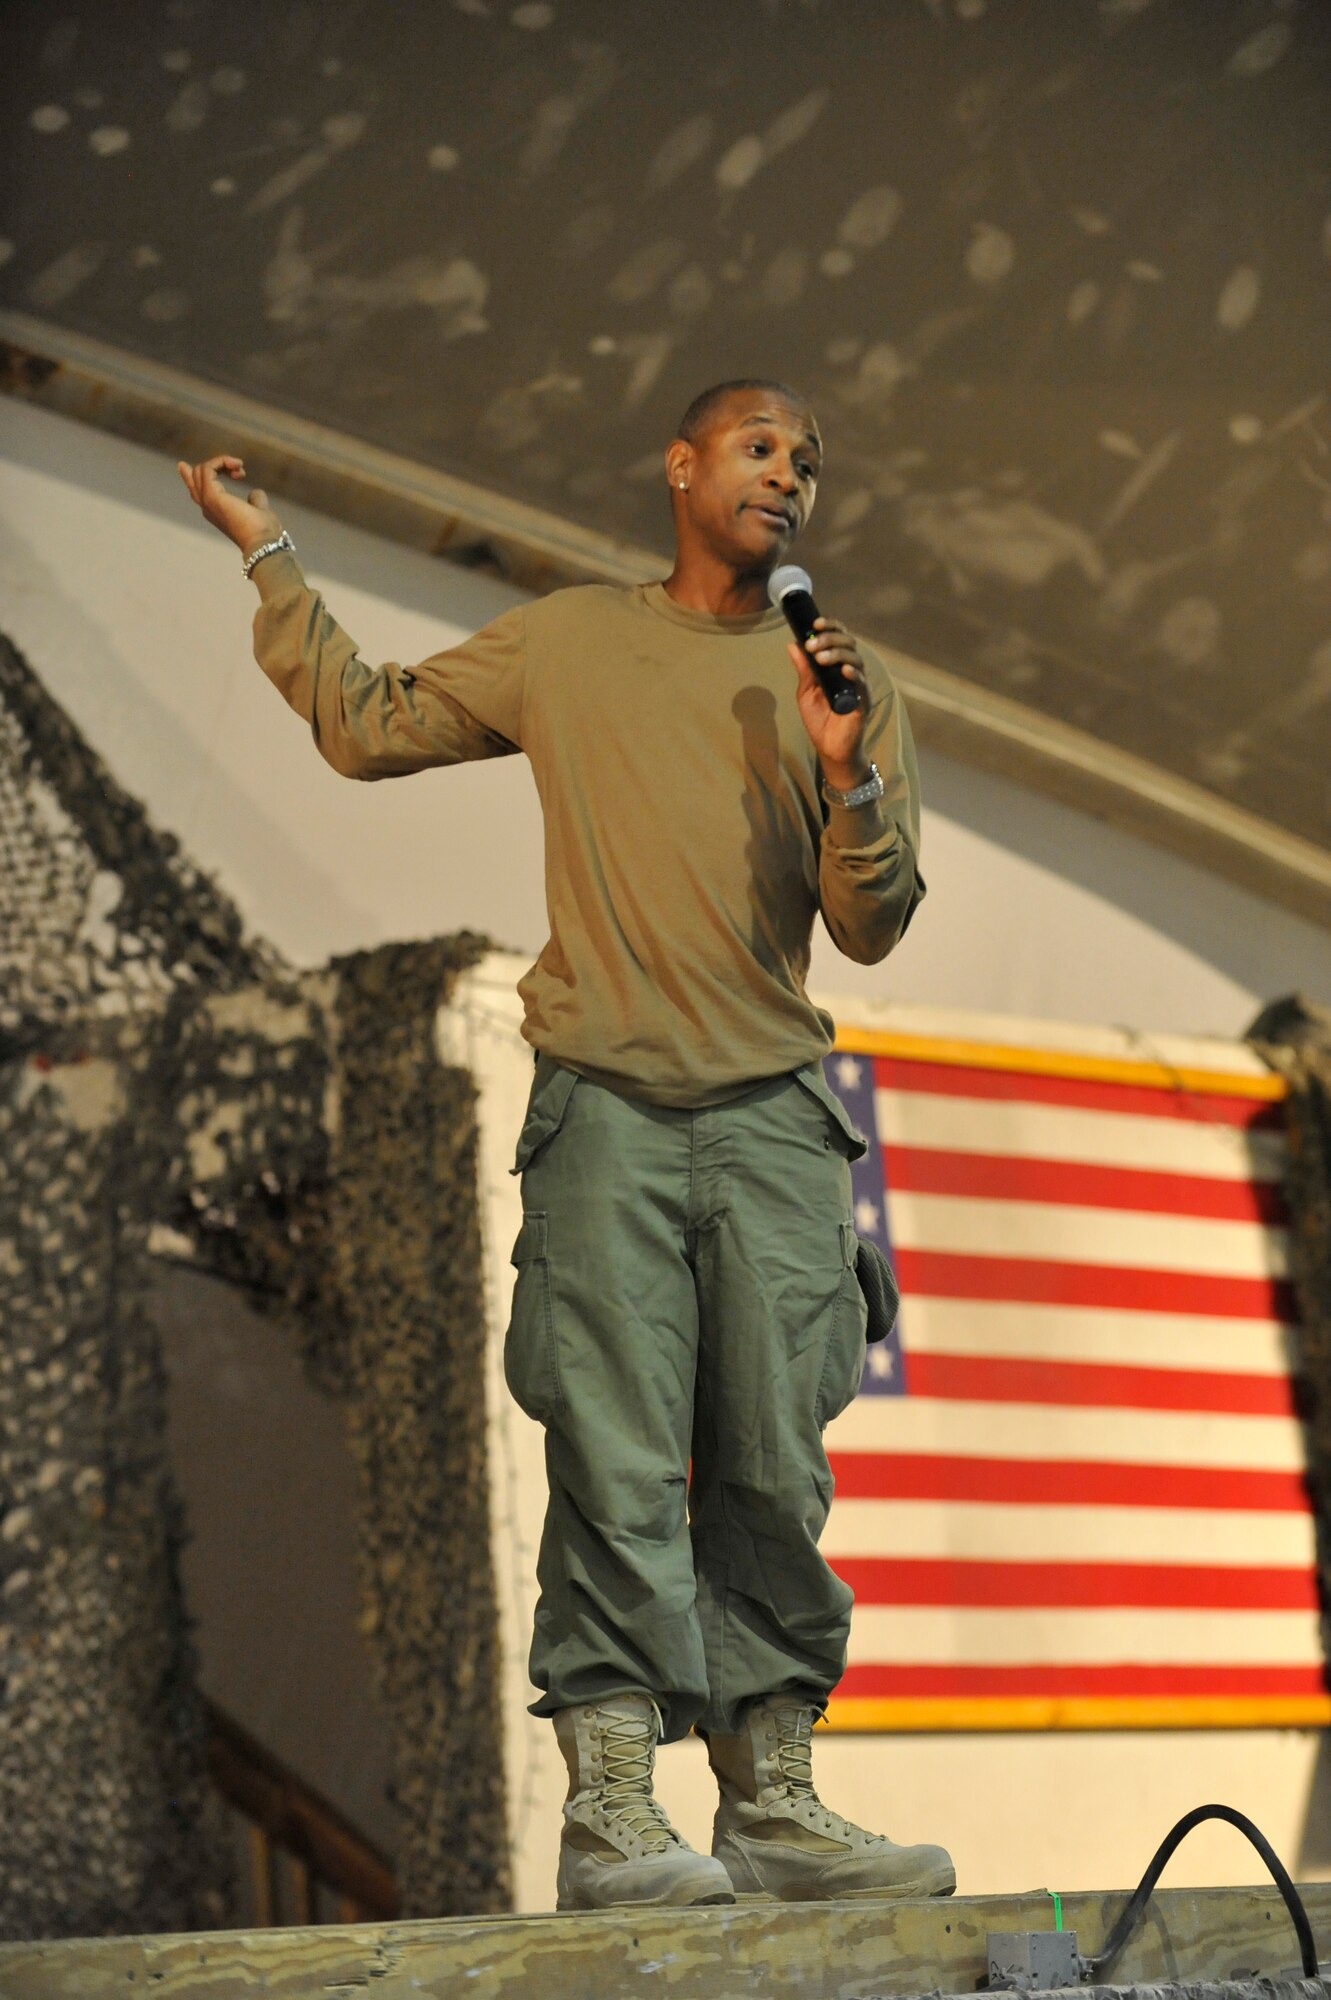 Comedian Tommy Davidson performs for deployed Service members on New Year's Eve at Bagram Airfield, Afghanistan, Dec. 31, 2013.(U.S. Air Force photo by Senior Master Sgt. Gary J. Rihn/Released)